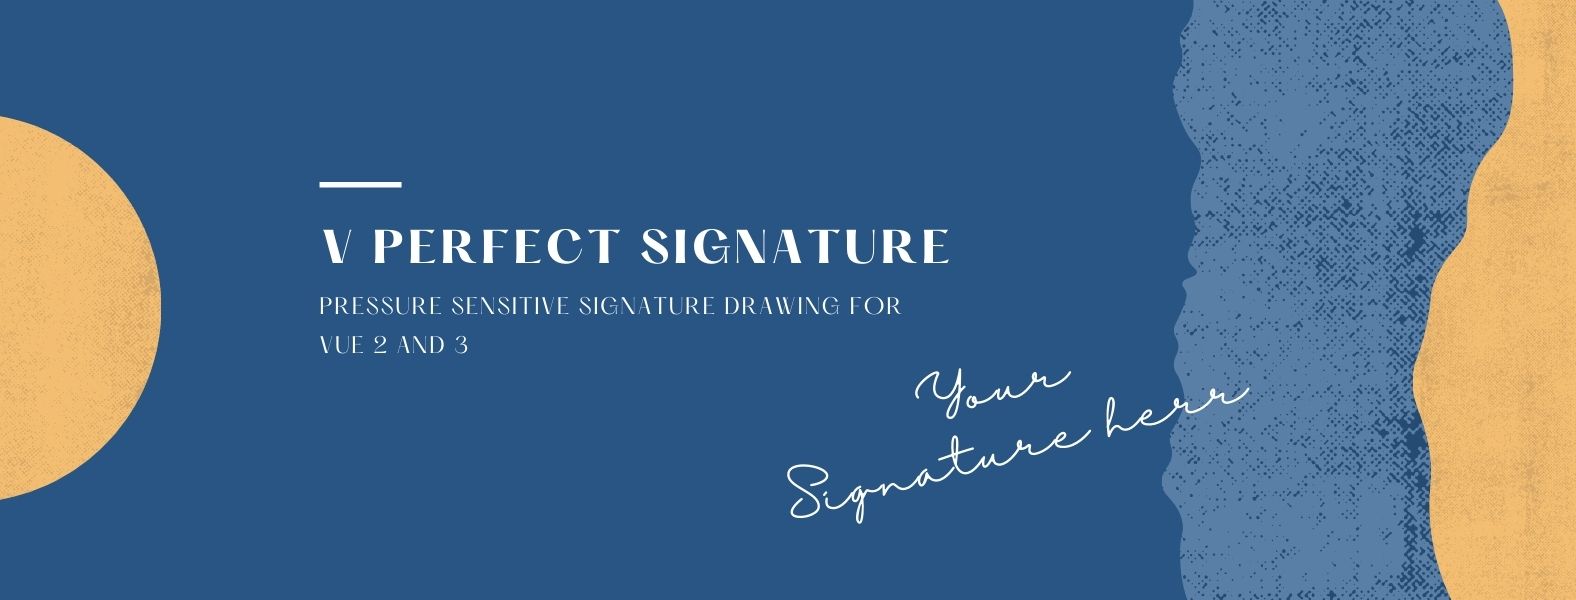 Pressure Sensitive Signature Drawing for Vue 2 and 3  cover image